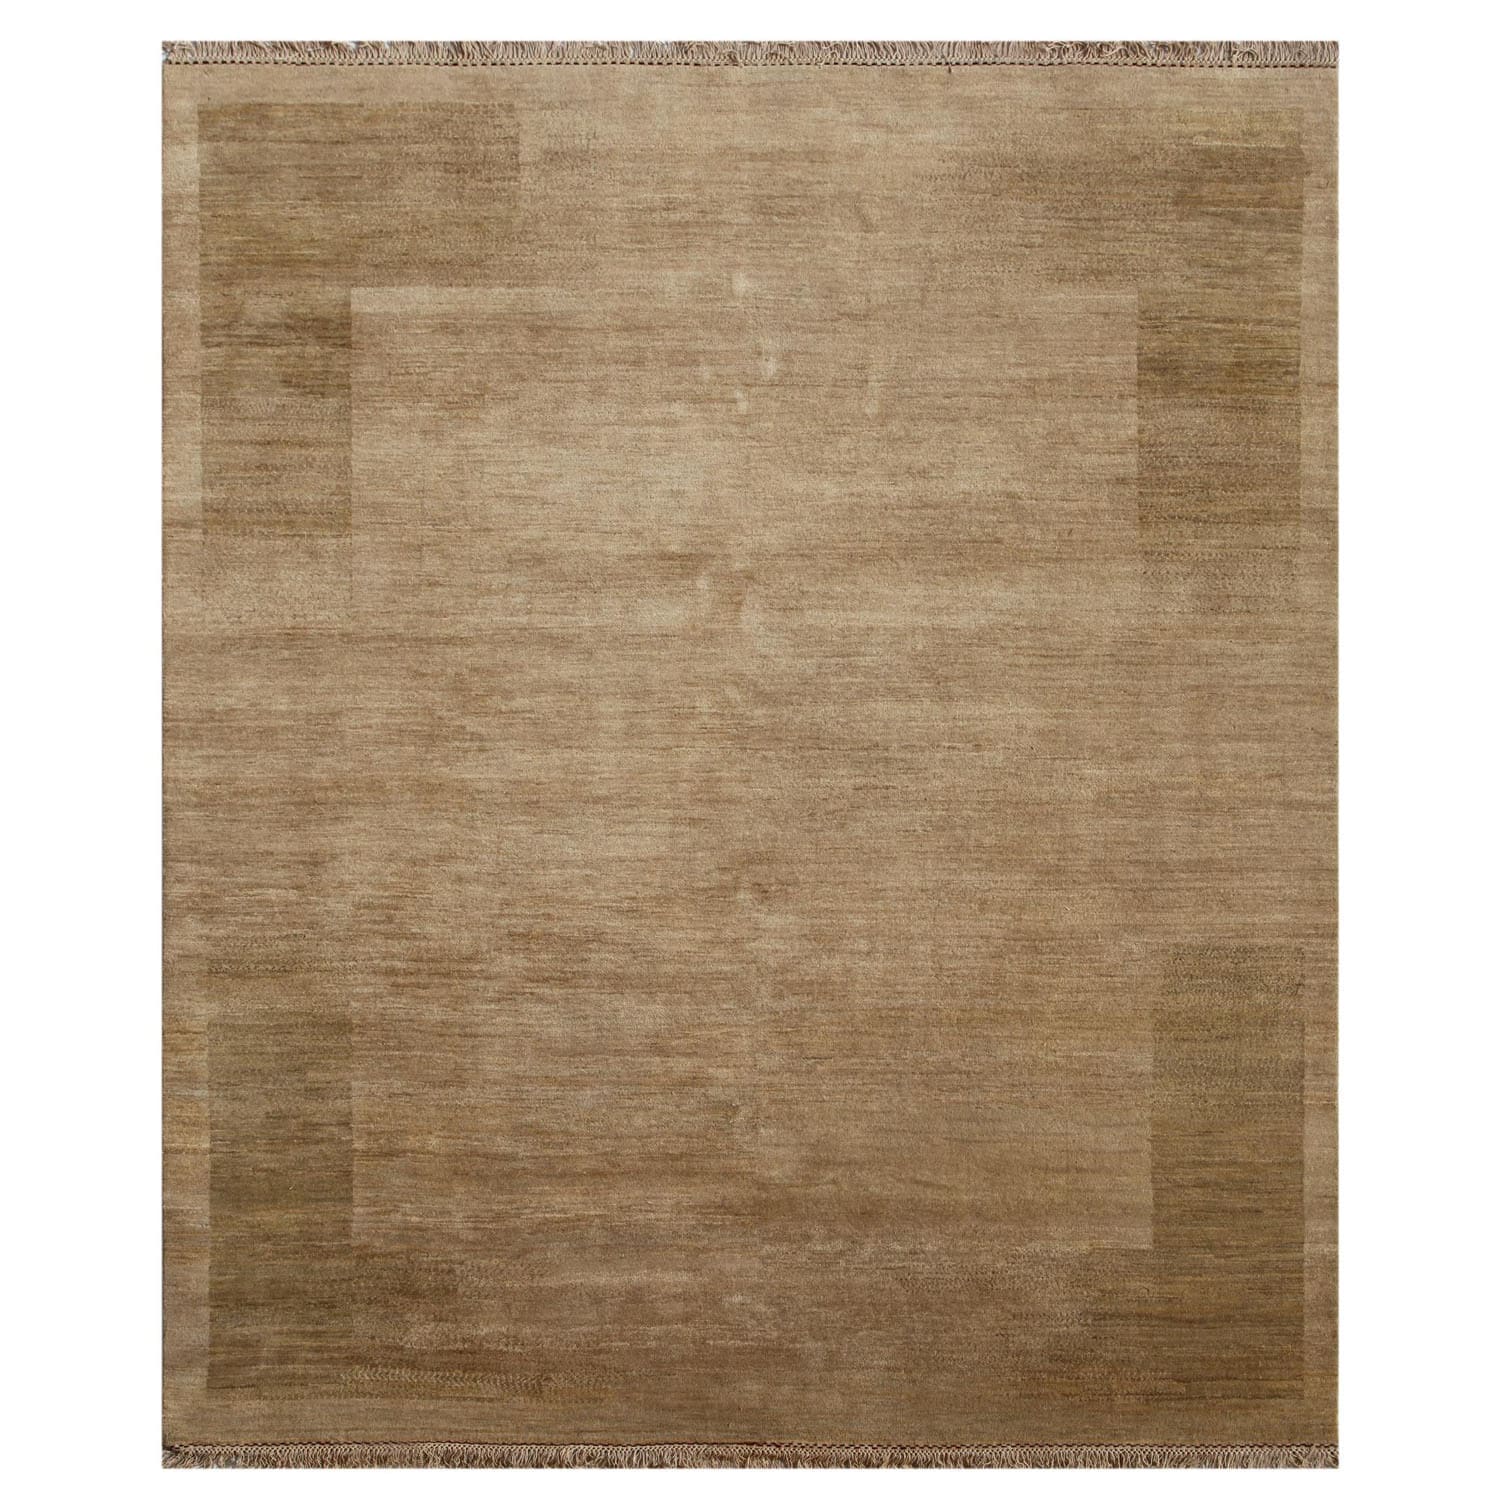 Hand knotted Gold Solid Wool Rug (8 X 10)